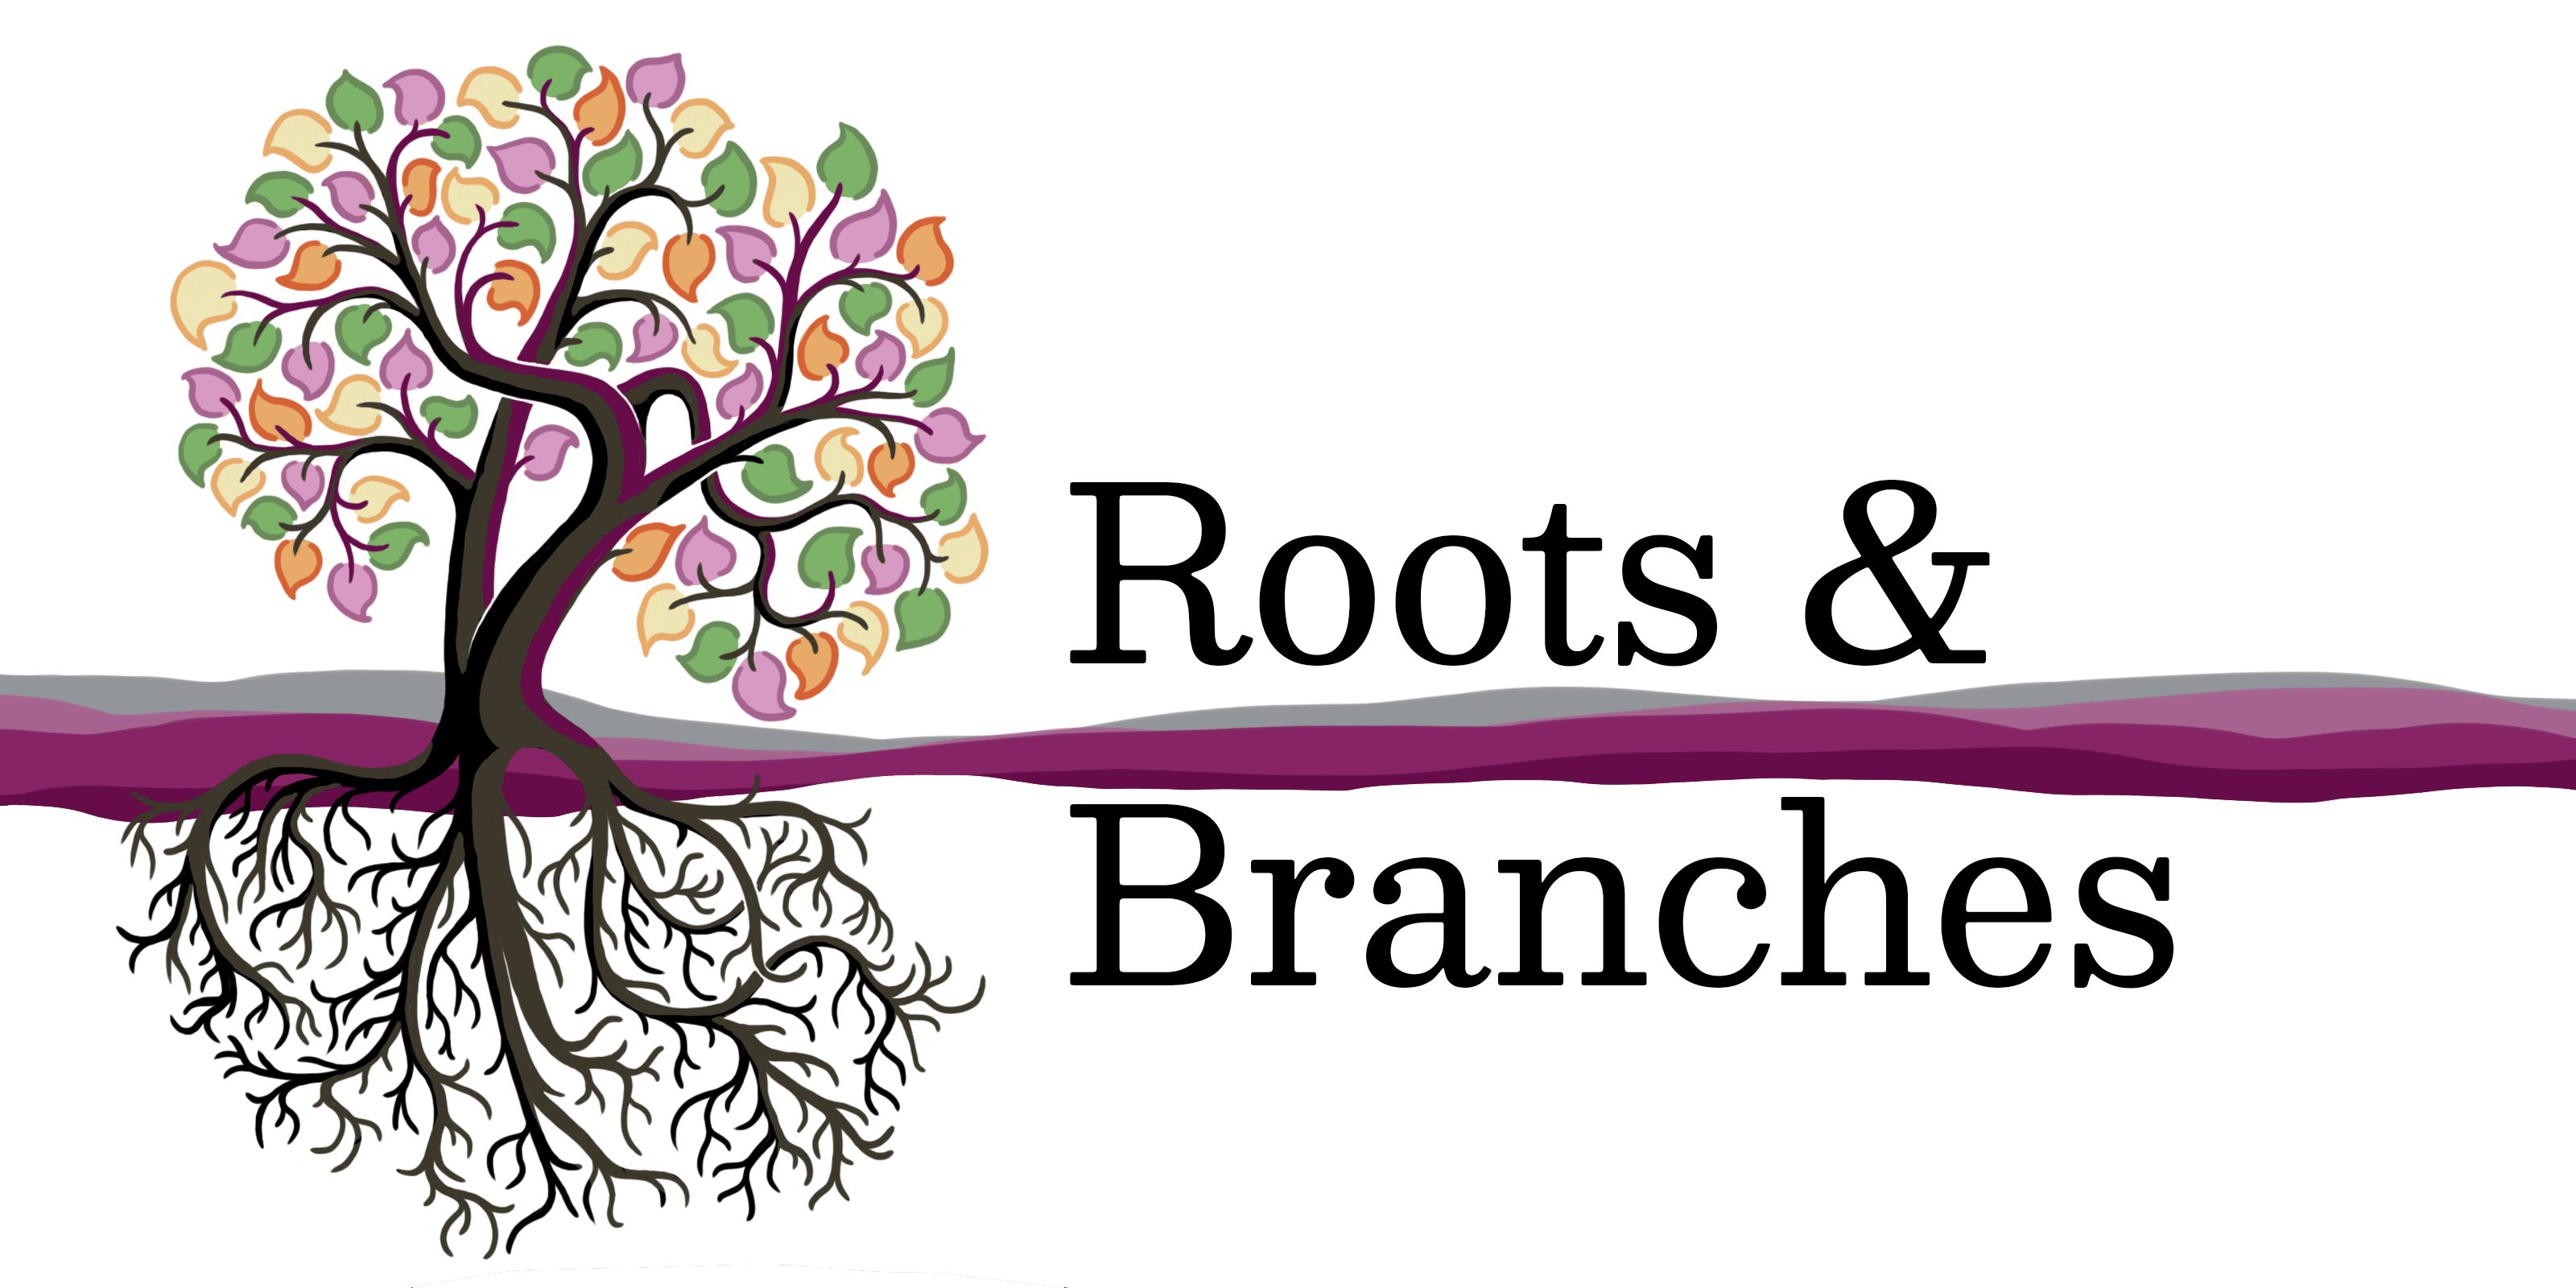 Concert "Roots & Branches"